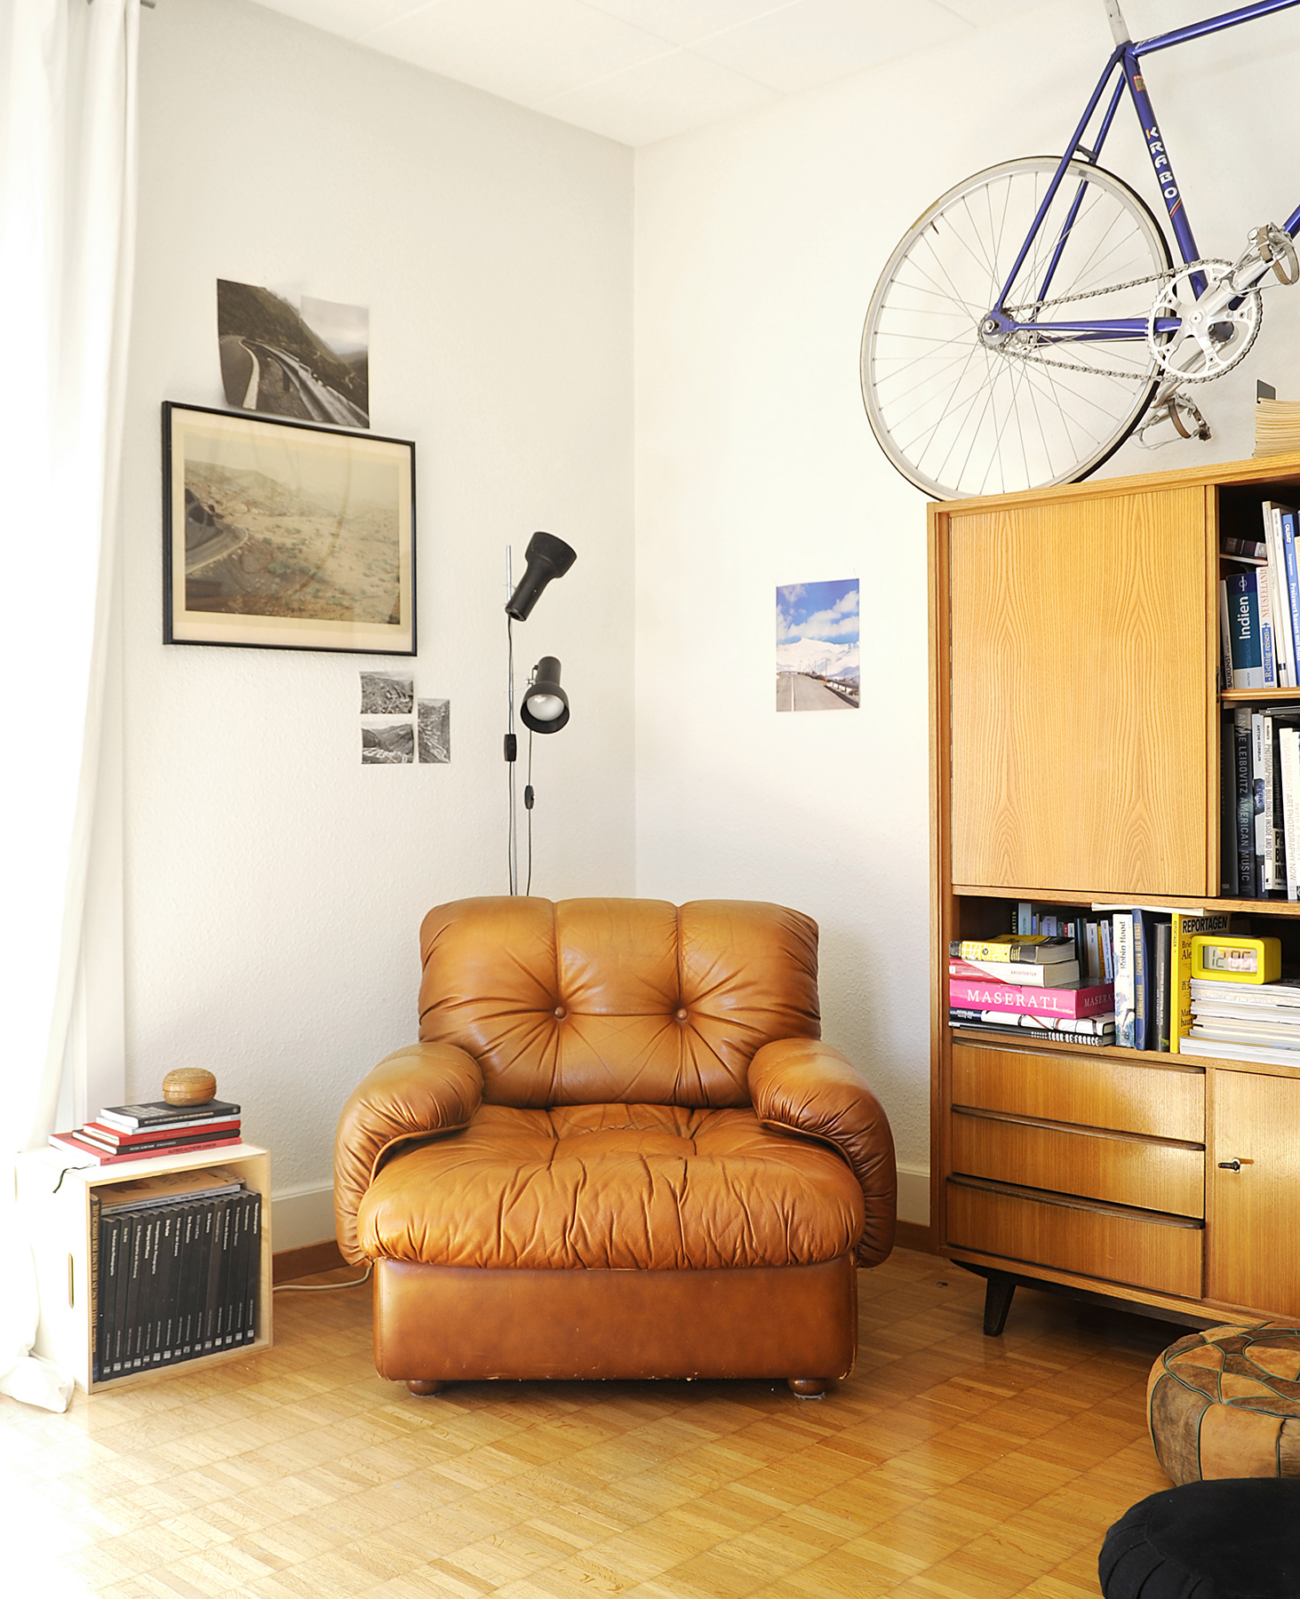 interior, design, architecture, furniture, lounge chair, leather, floor lamp, vintage, bicycle, 